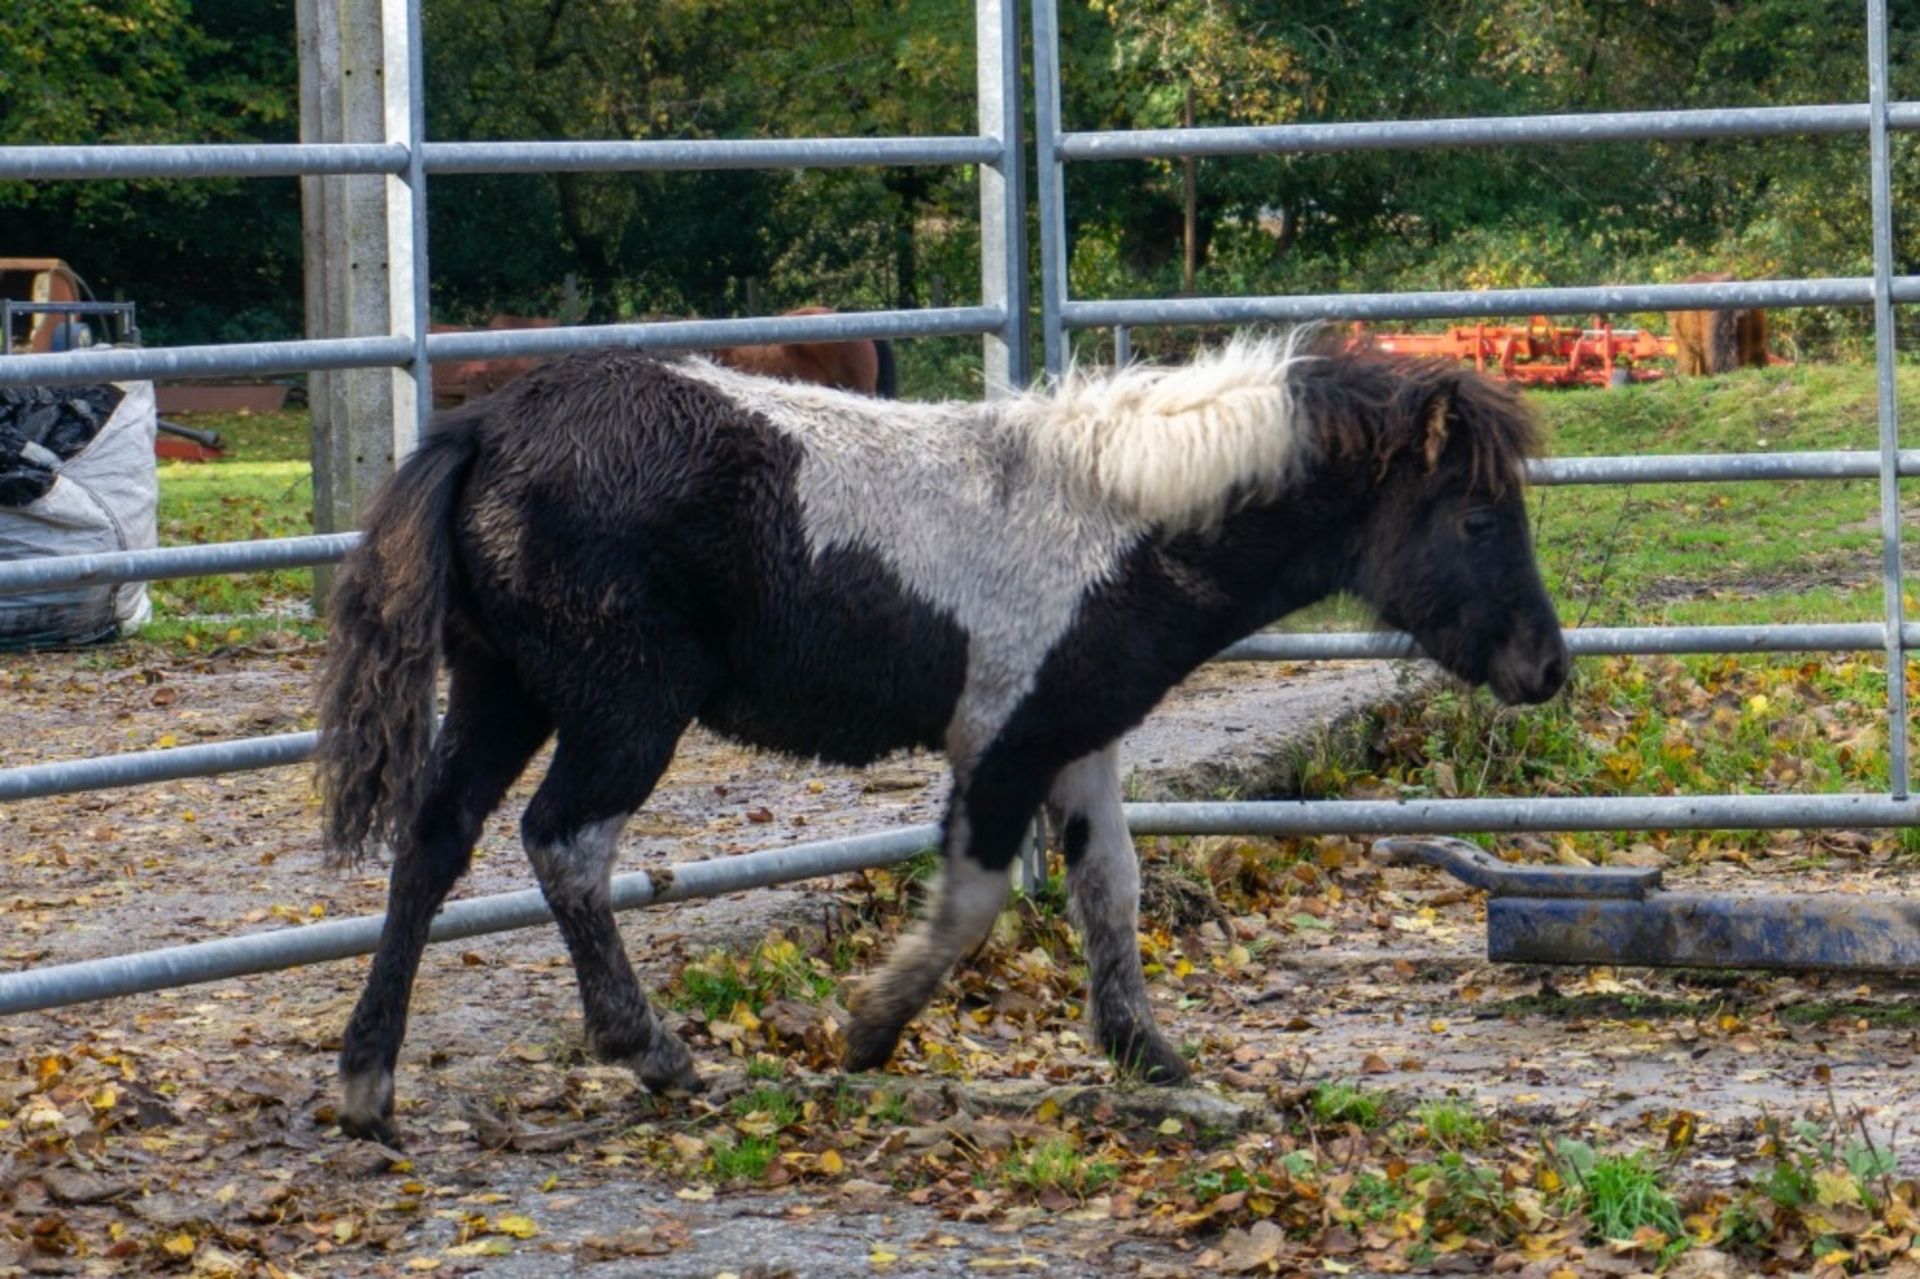 'CHINKWELL SAINT LAURENT' SHETLAND X DARTMOOR HILL PONY PIEBALD COLT APPROX 6 MONTHS OLD - Image 2 of 2